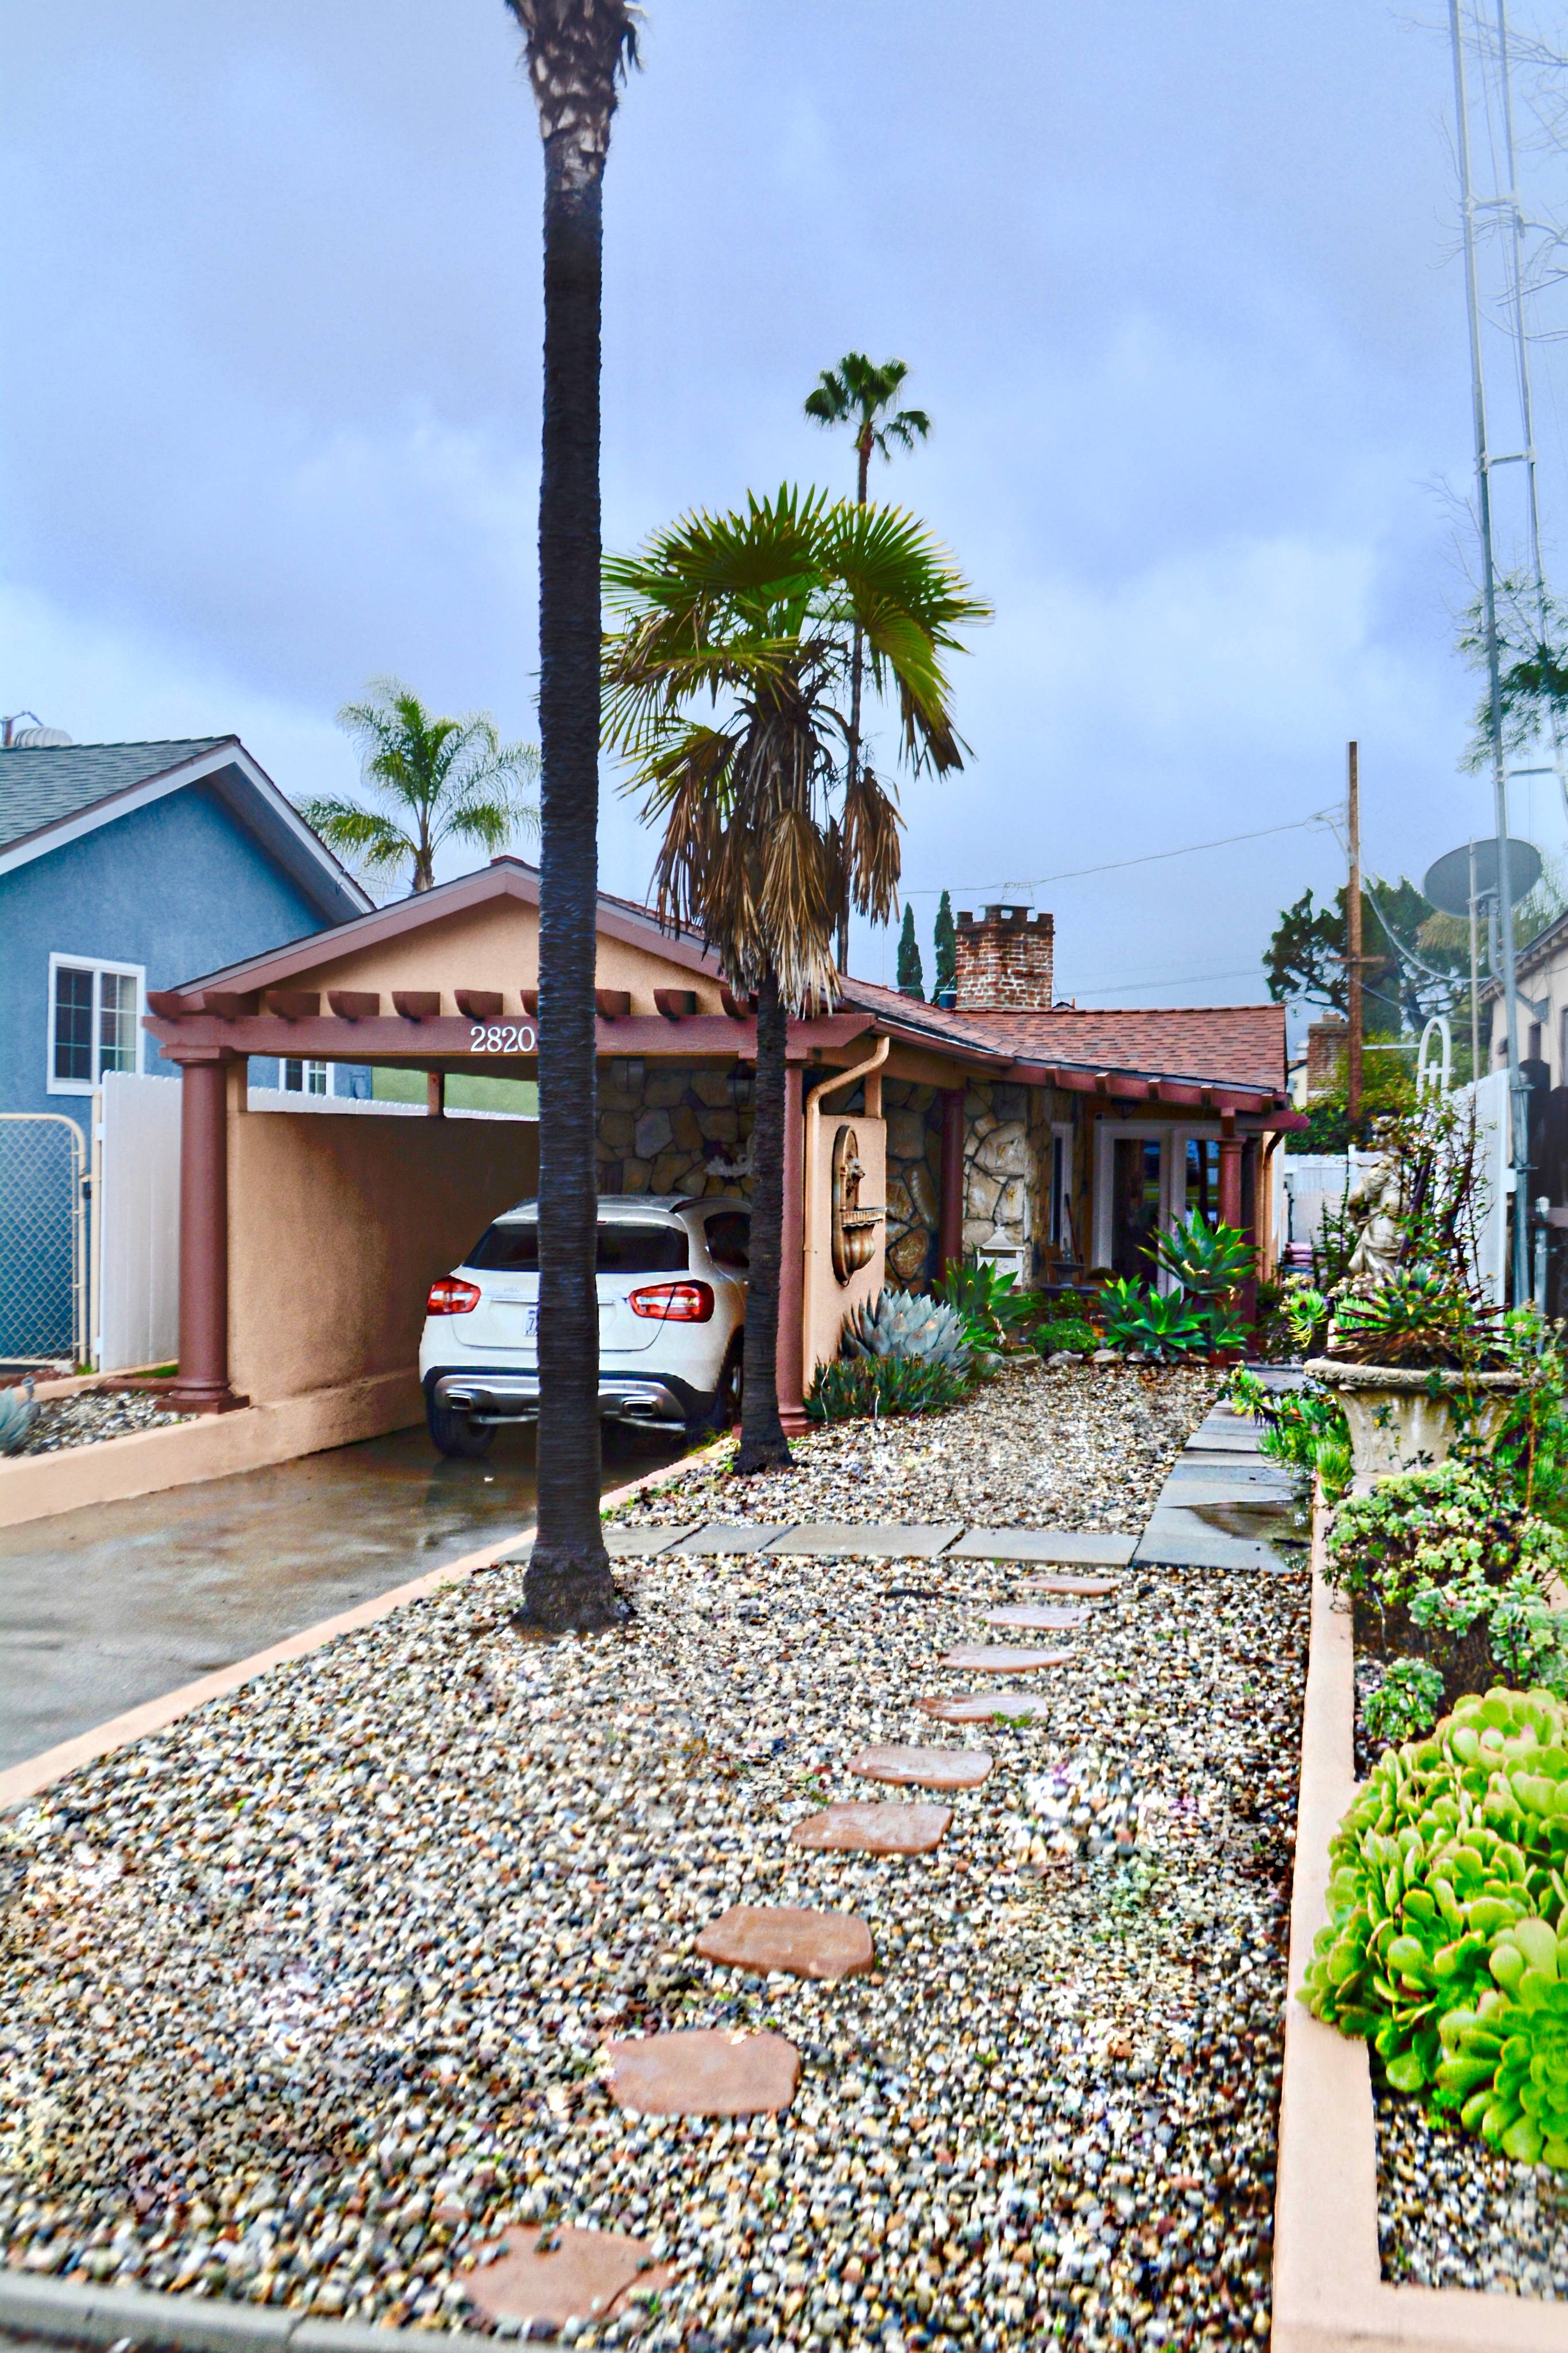 Fabulous Opportunity to purchase a 3 bed 2 bath single family home in Popular Burbank